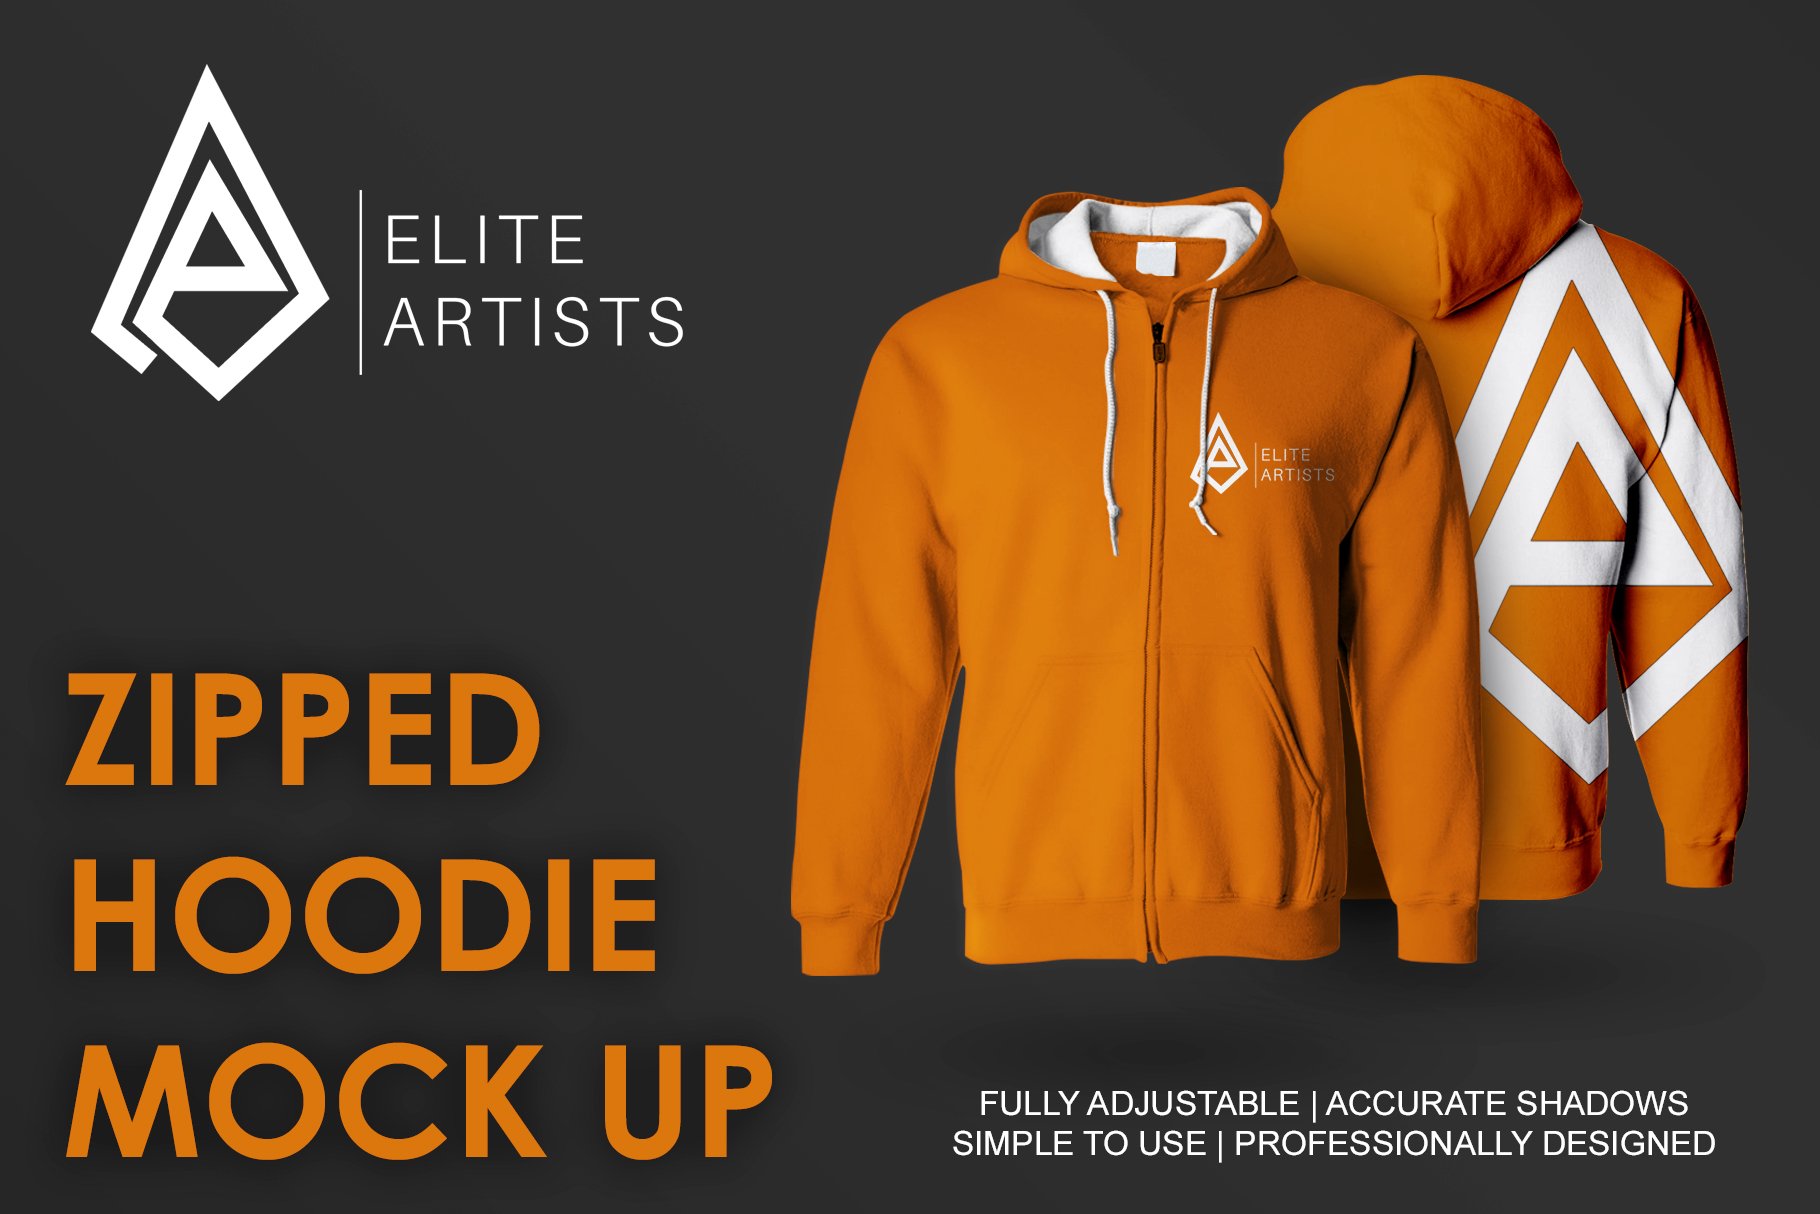 Zipped Hoodie Mock Up cover image.